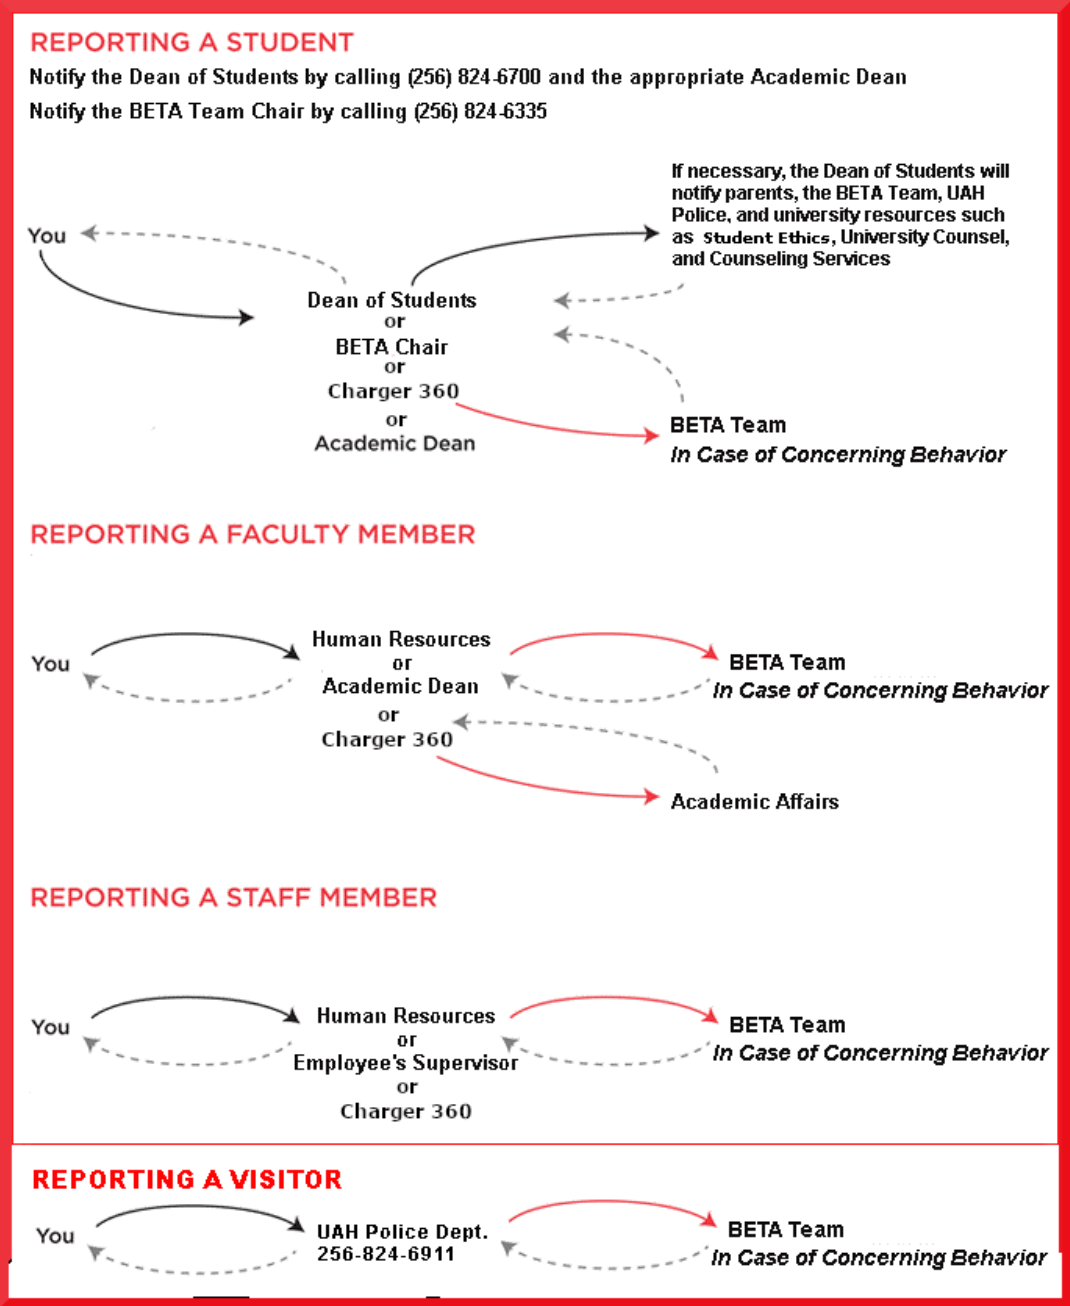 flow chart depicting the process of reporting a student, faculty member, staff member, or visitor to the Dean of Students by calling 256-824-6700